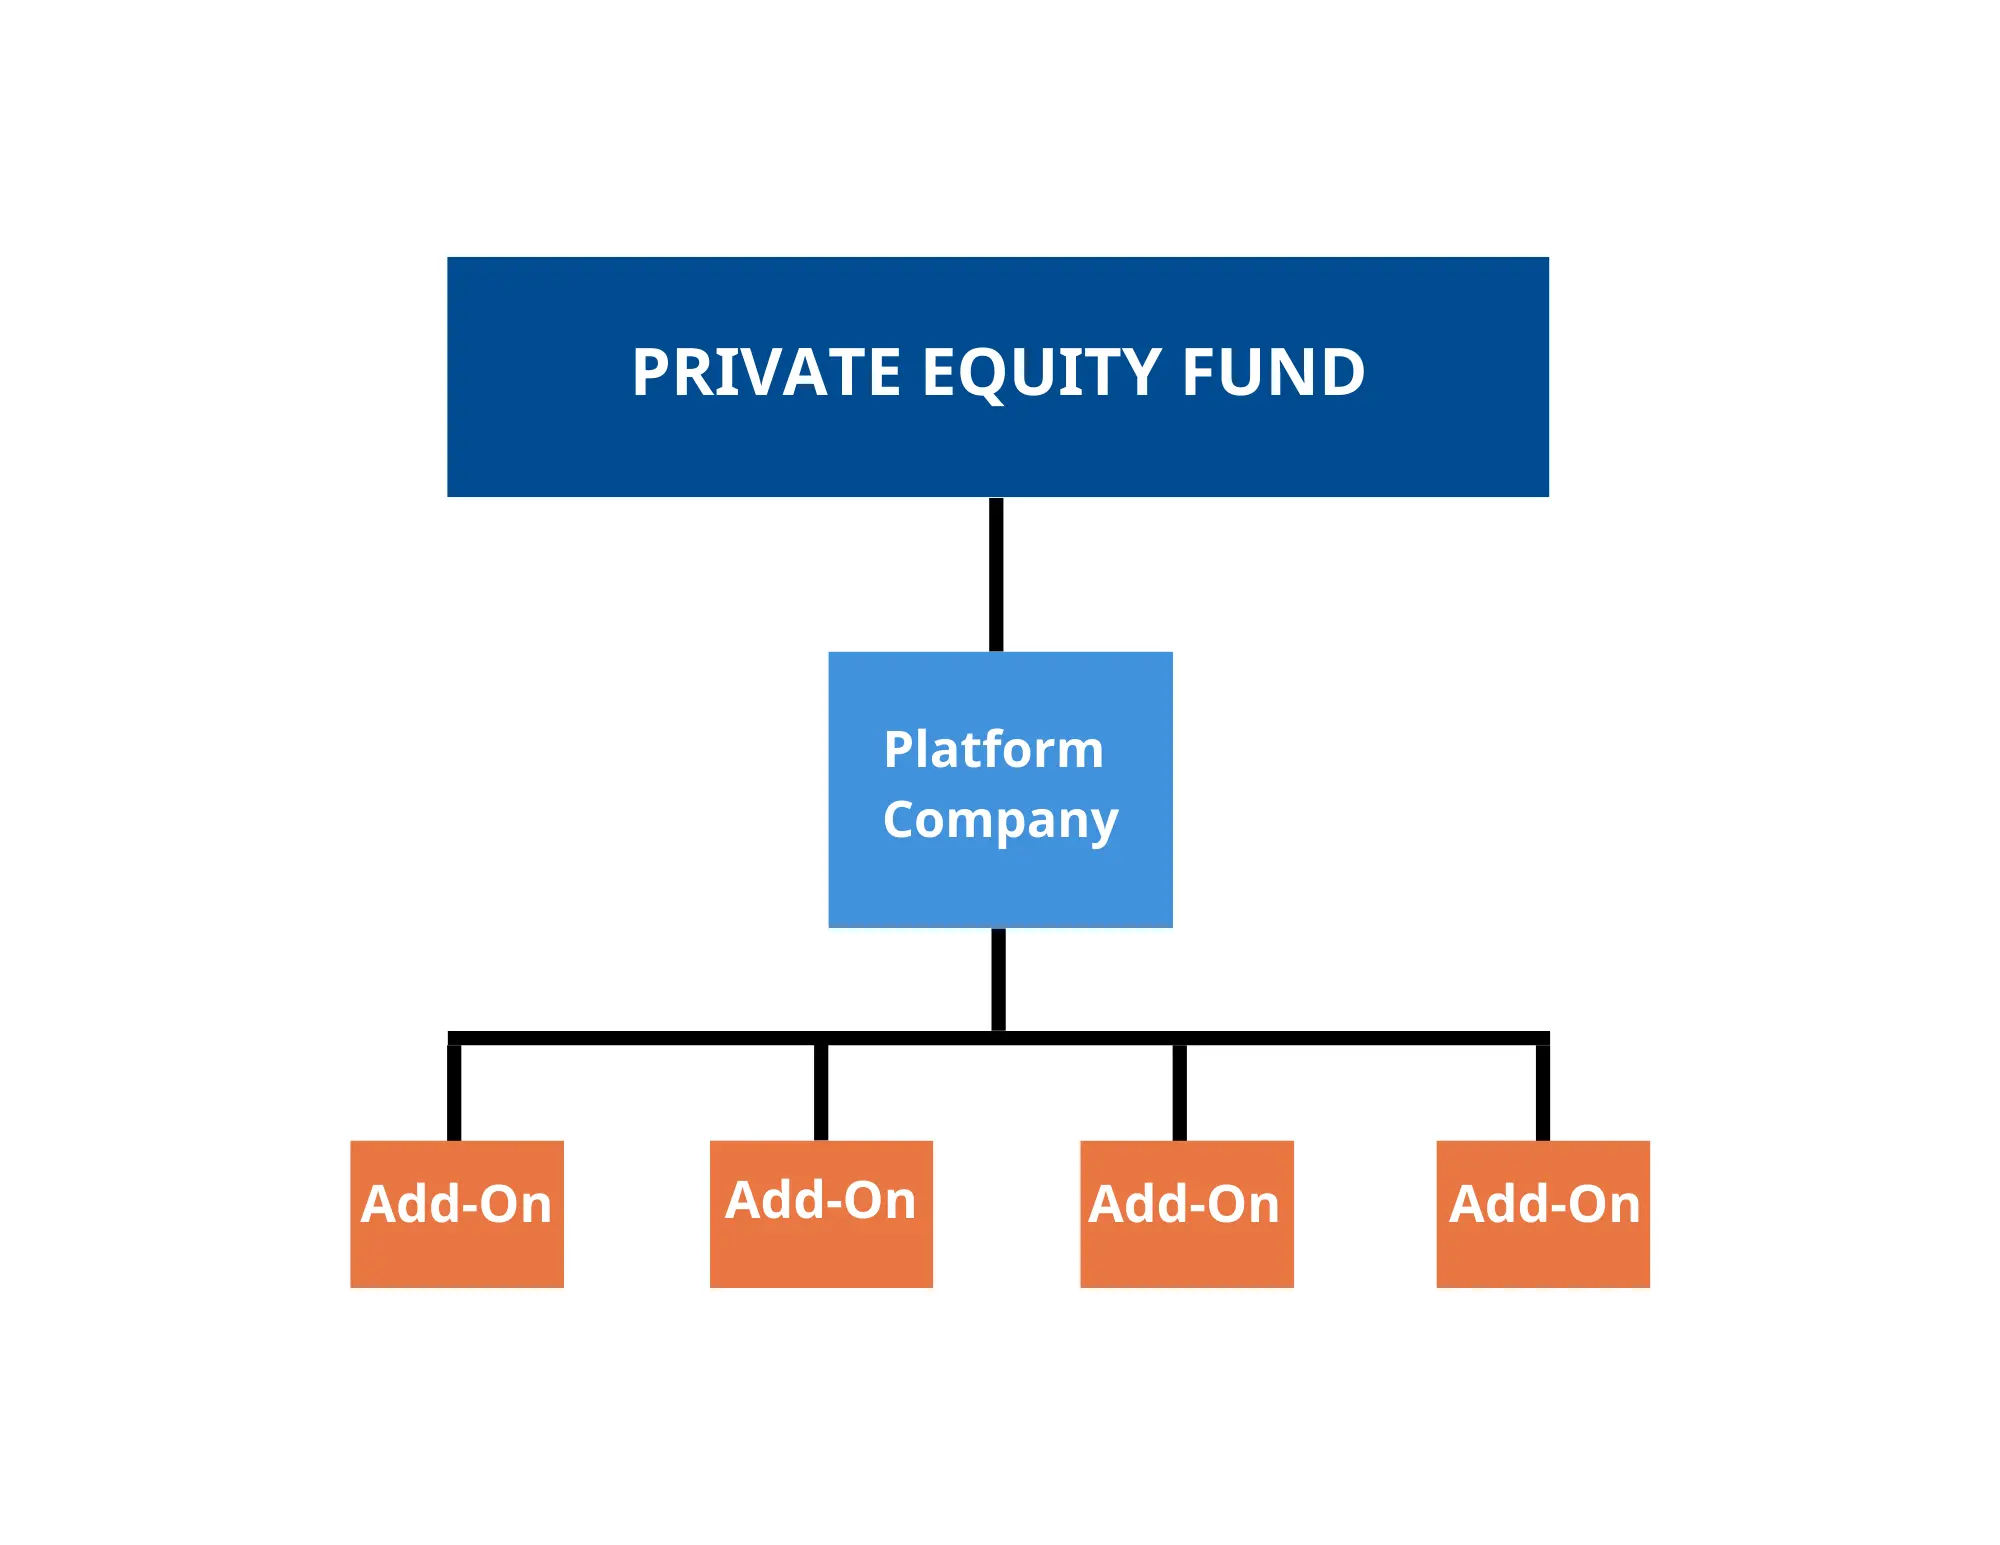 What Is a Platform Company in Private Equity?